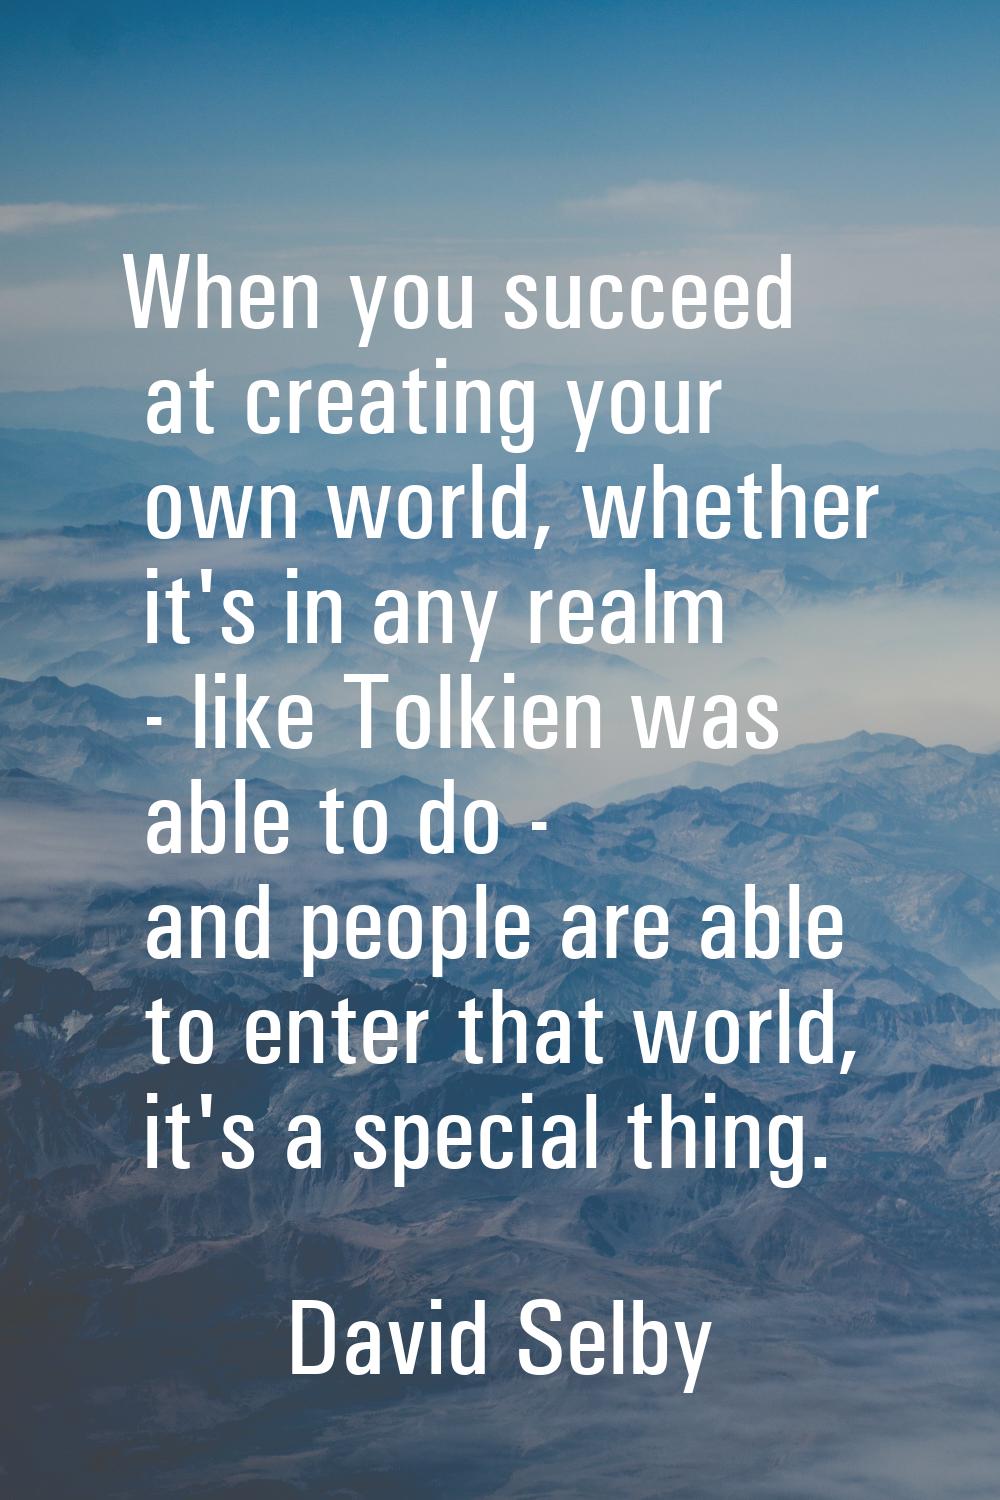 When you succeed at creating your own world, whether it's in any realm - like Tolkien was able to d